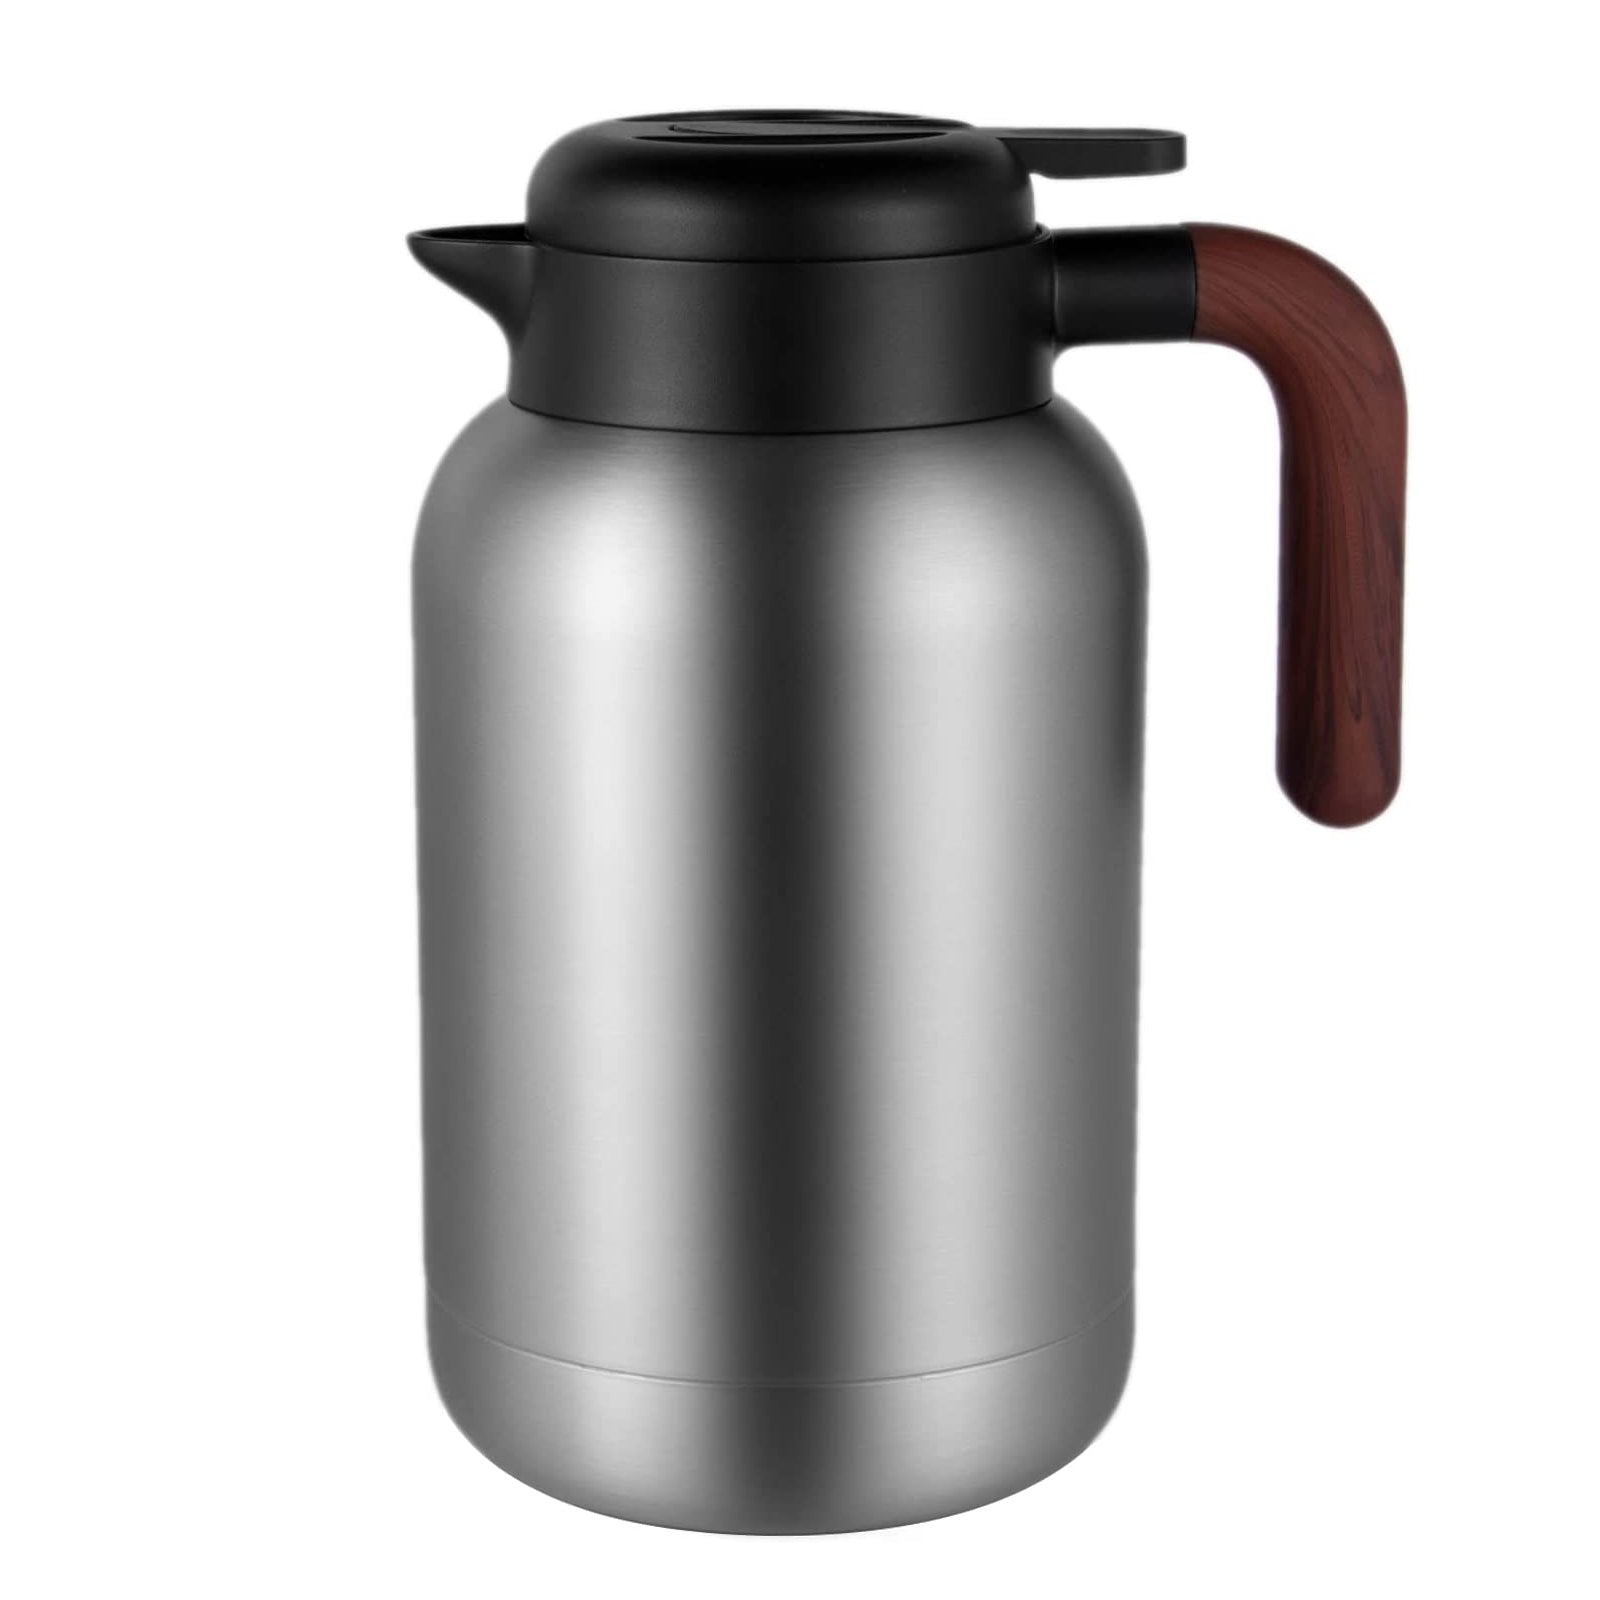 Carafe for Hot Liquids, 68oz/2L Thermal Coffee Carafe for Keeping Hot, Insulated Coffee Thermos Carafe, Stainless Steel Thermal Pot Flask Dual Wall